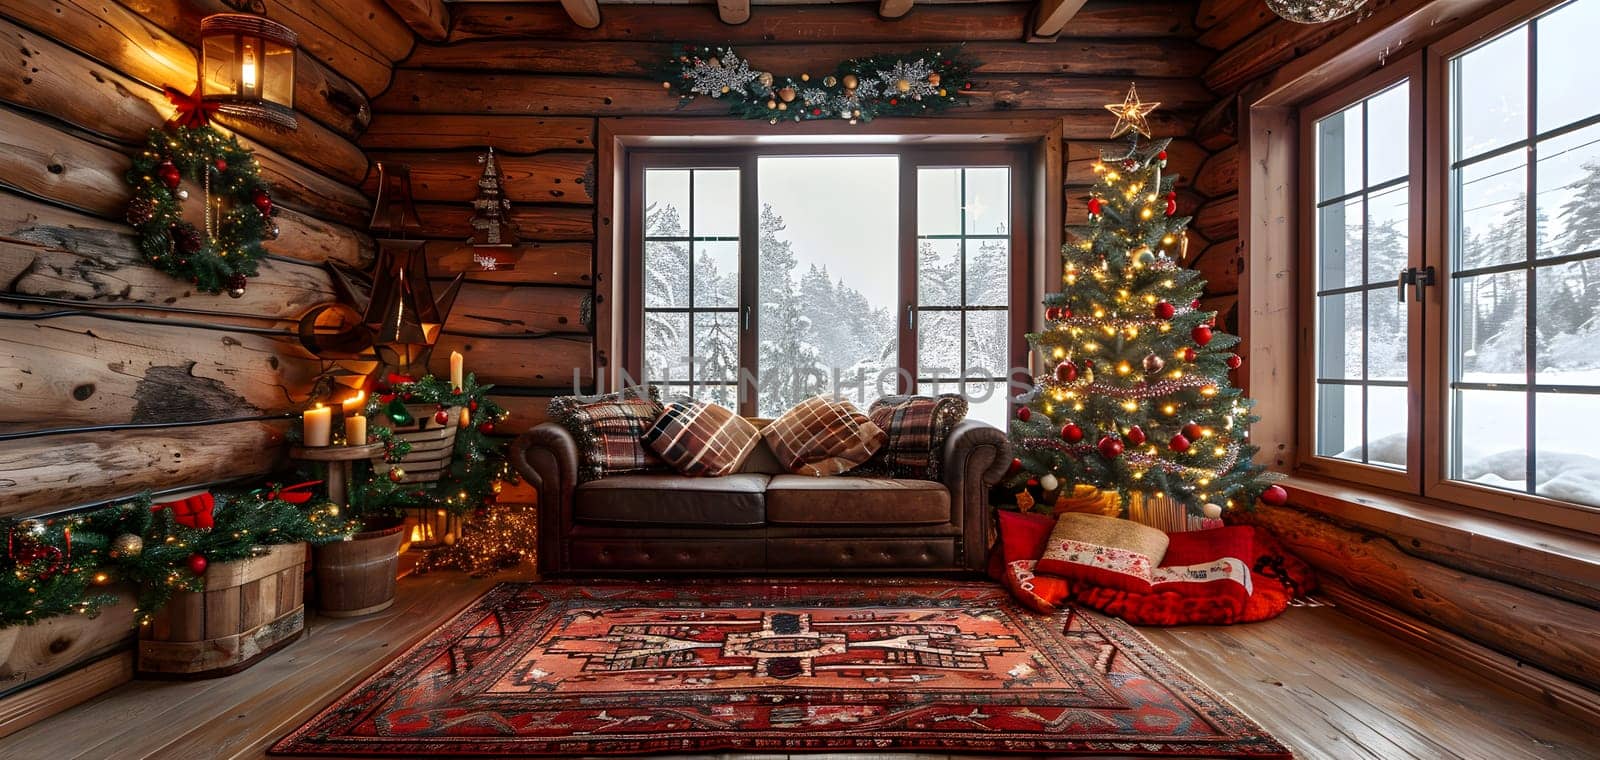 A cozy living room in a log cabin is adorned with Christmas decorations, featuring a couch and a beautifully decorated Christmas tree, creating a festive and warm atmosphere